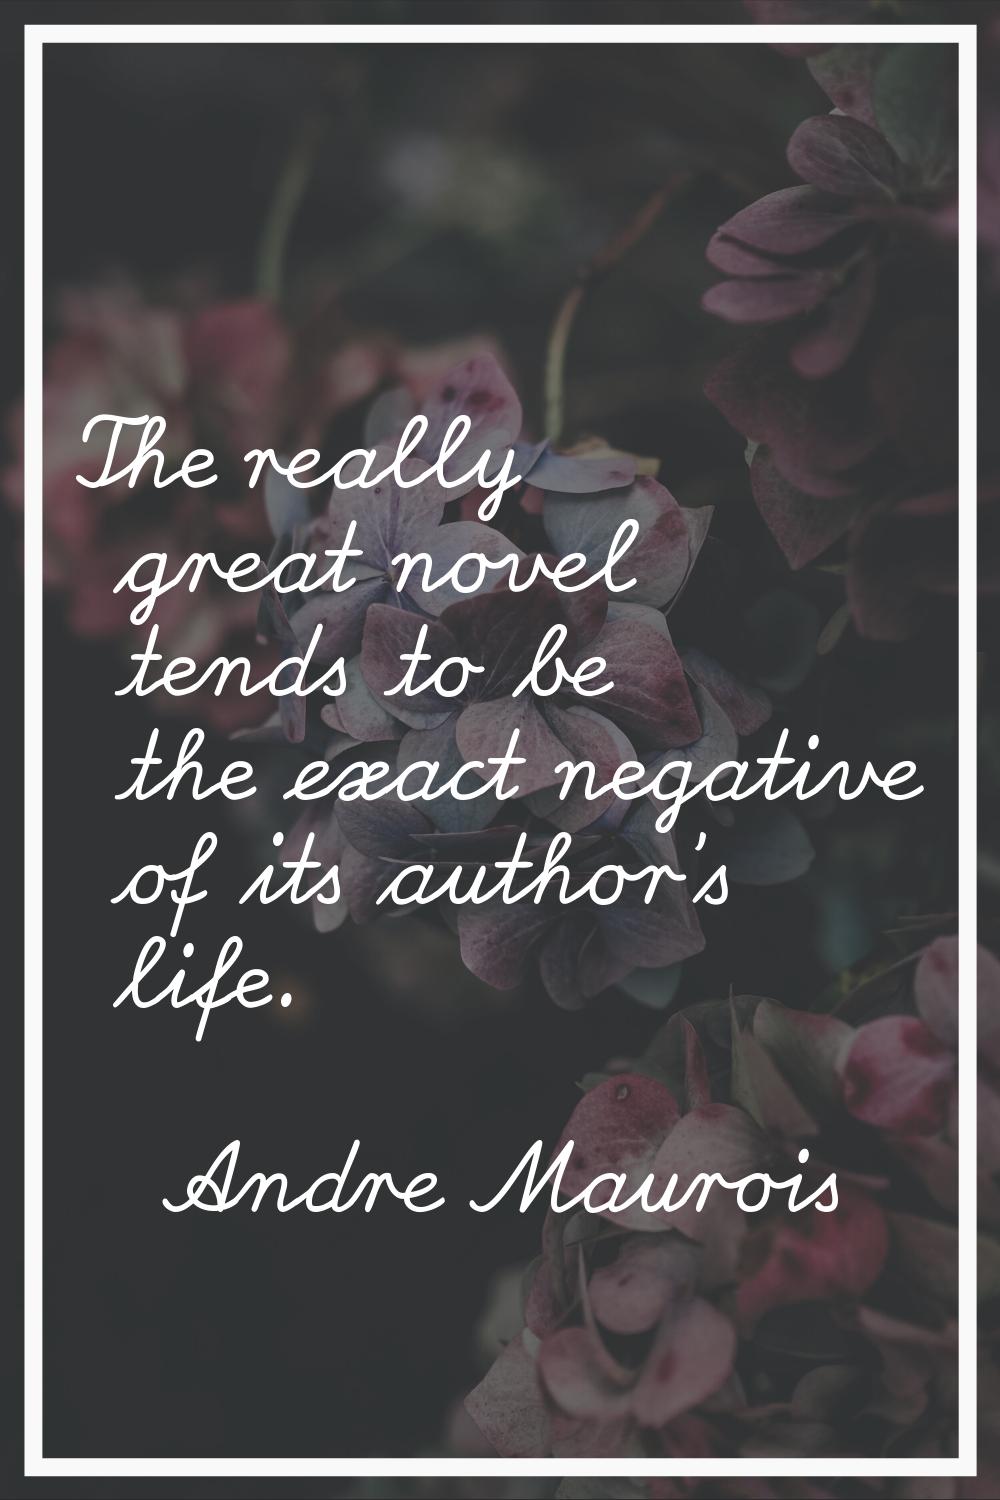 The really great novel tends to be the exact negative of its author's life.